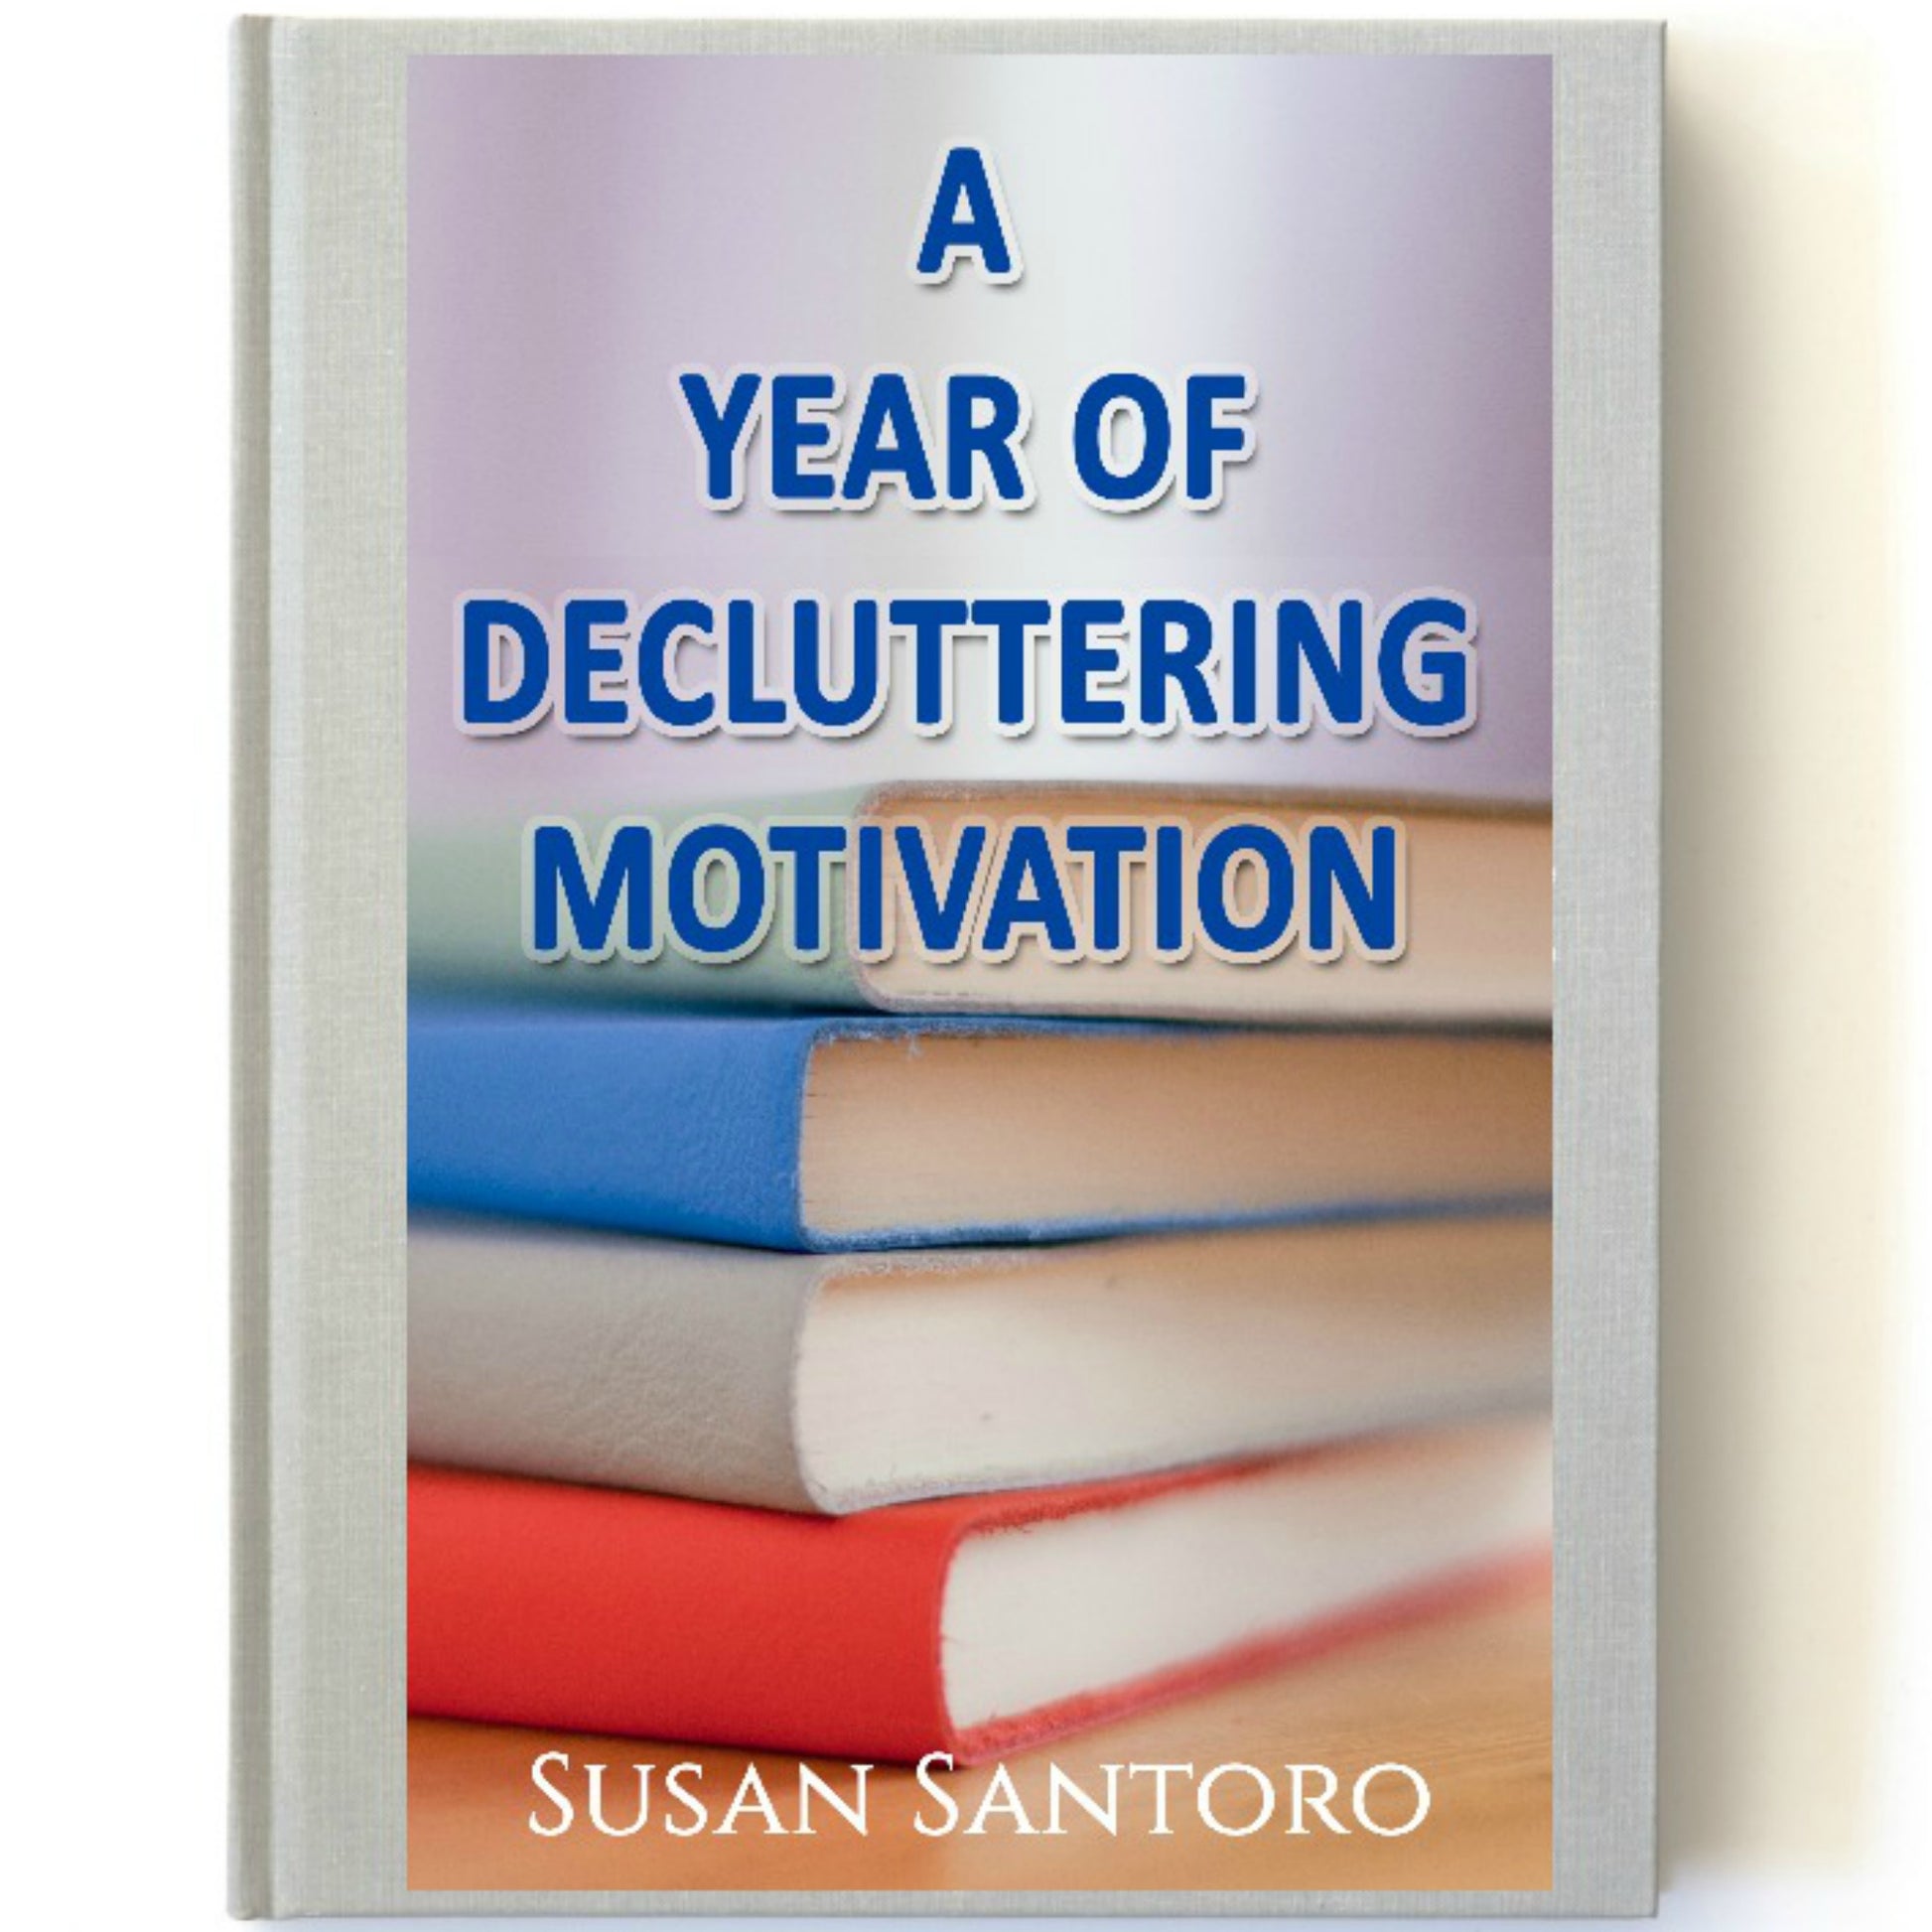 A Year of Decluttering Motivation from the Organized 31 Shop, that incorporates clutter theory principles.